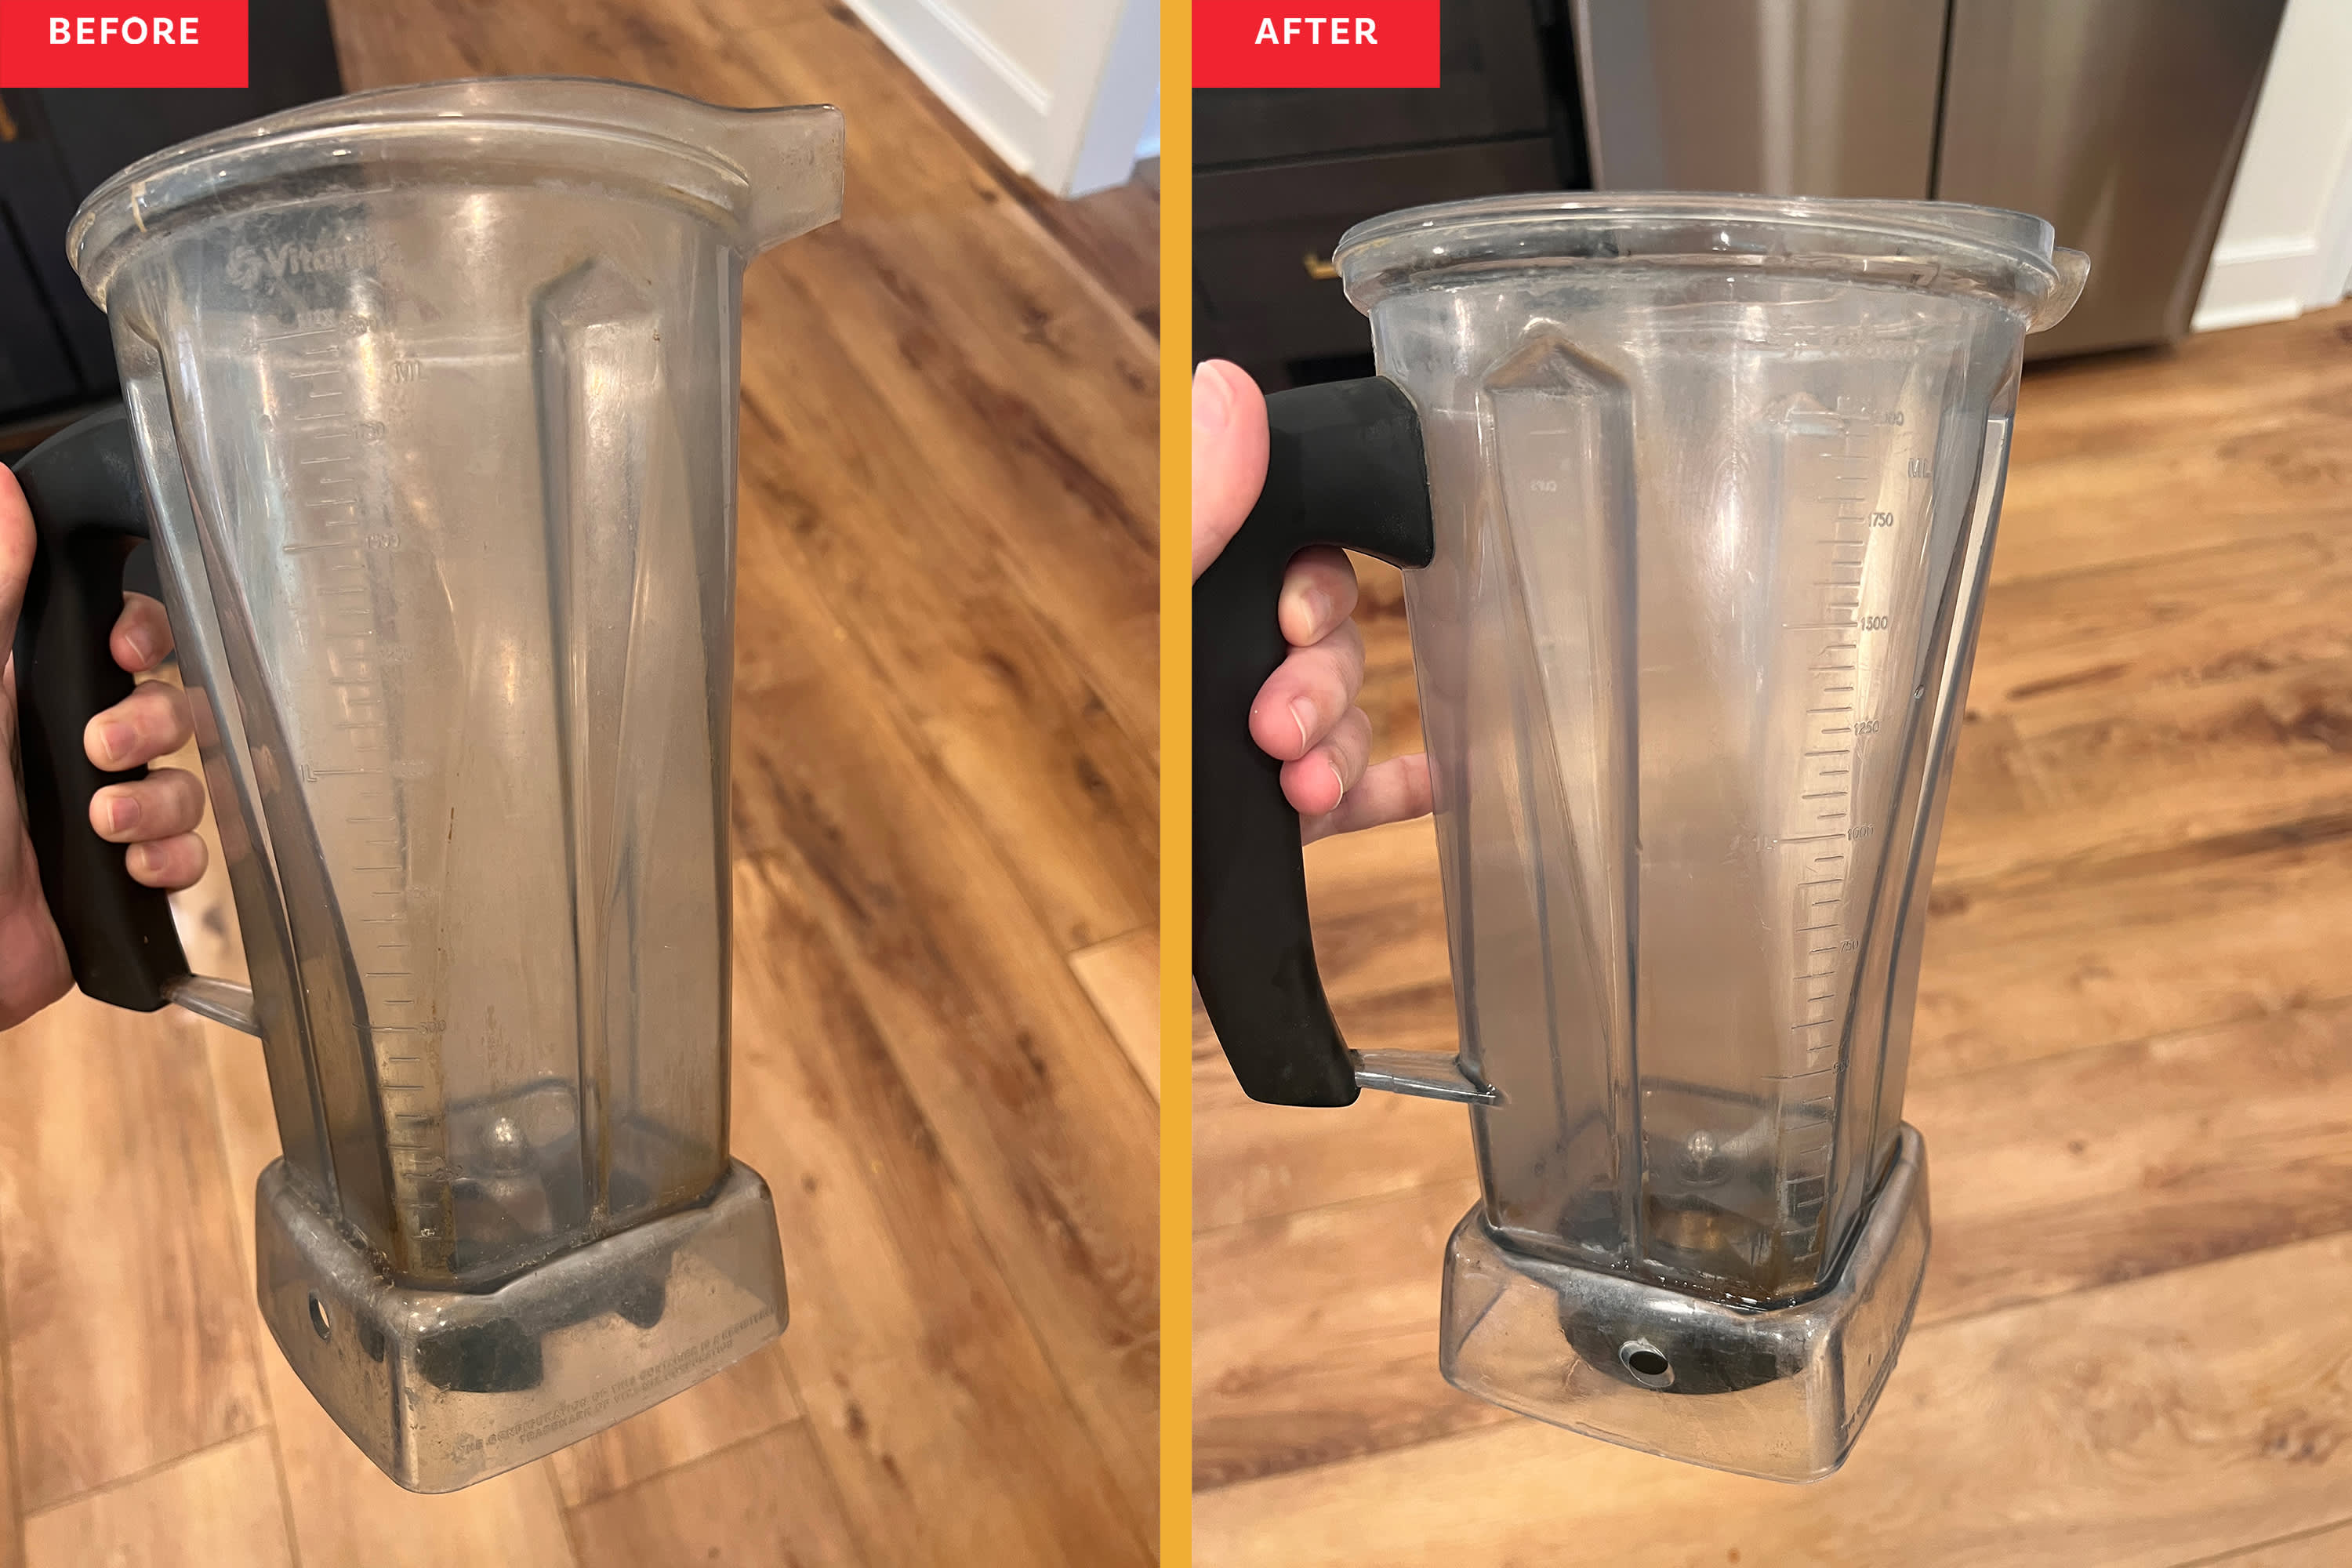 Tips for cleaning Vitamix container in a dishwasher - SecondRecipe